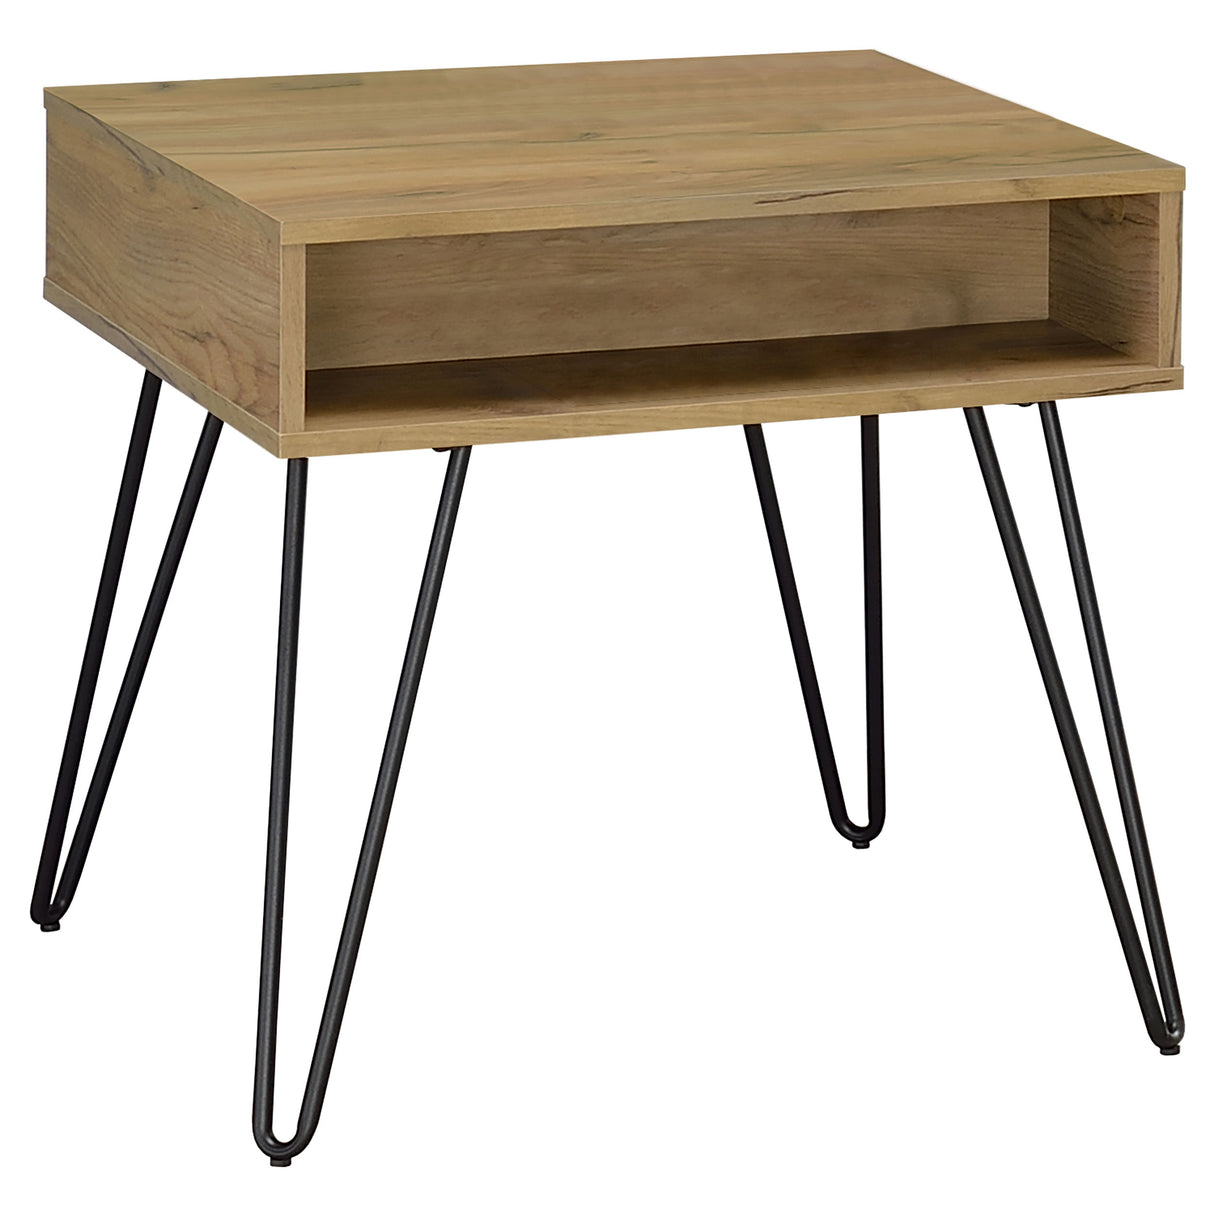 End Table - Fanning Square End Table with Open Compartment Golden Oak and Black